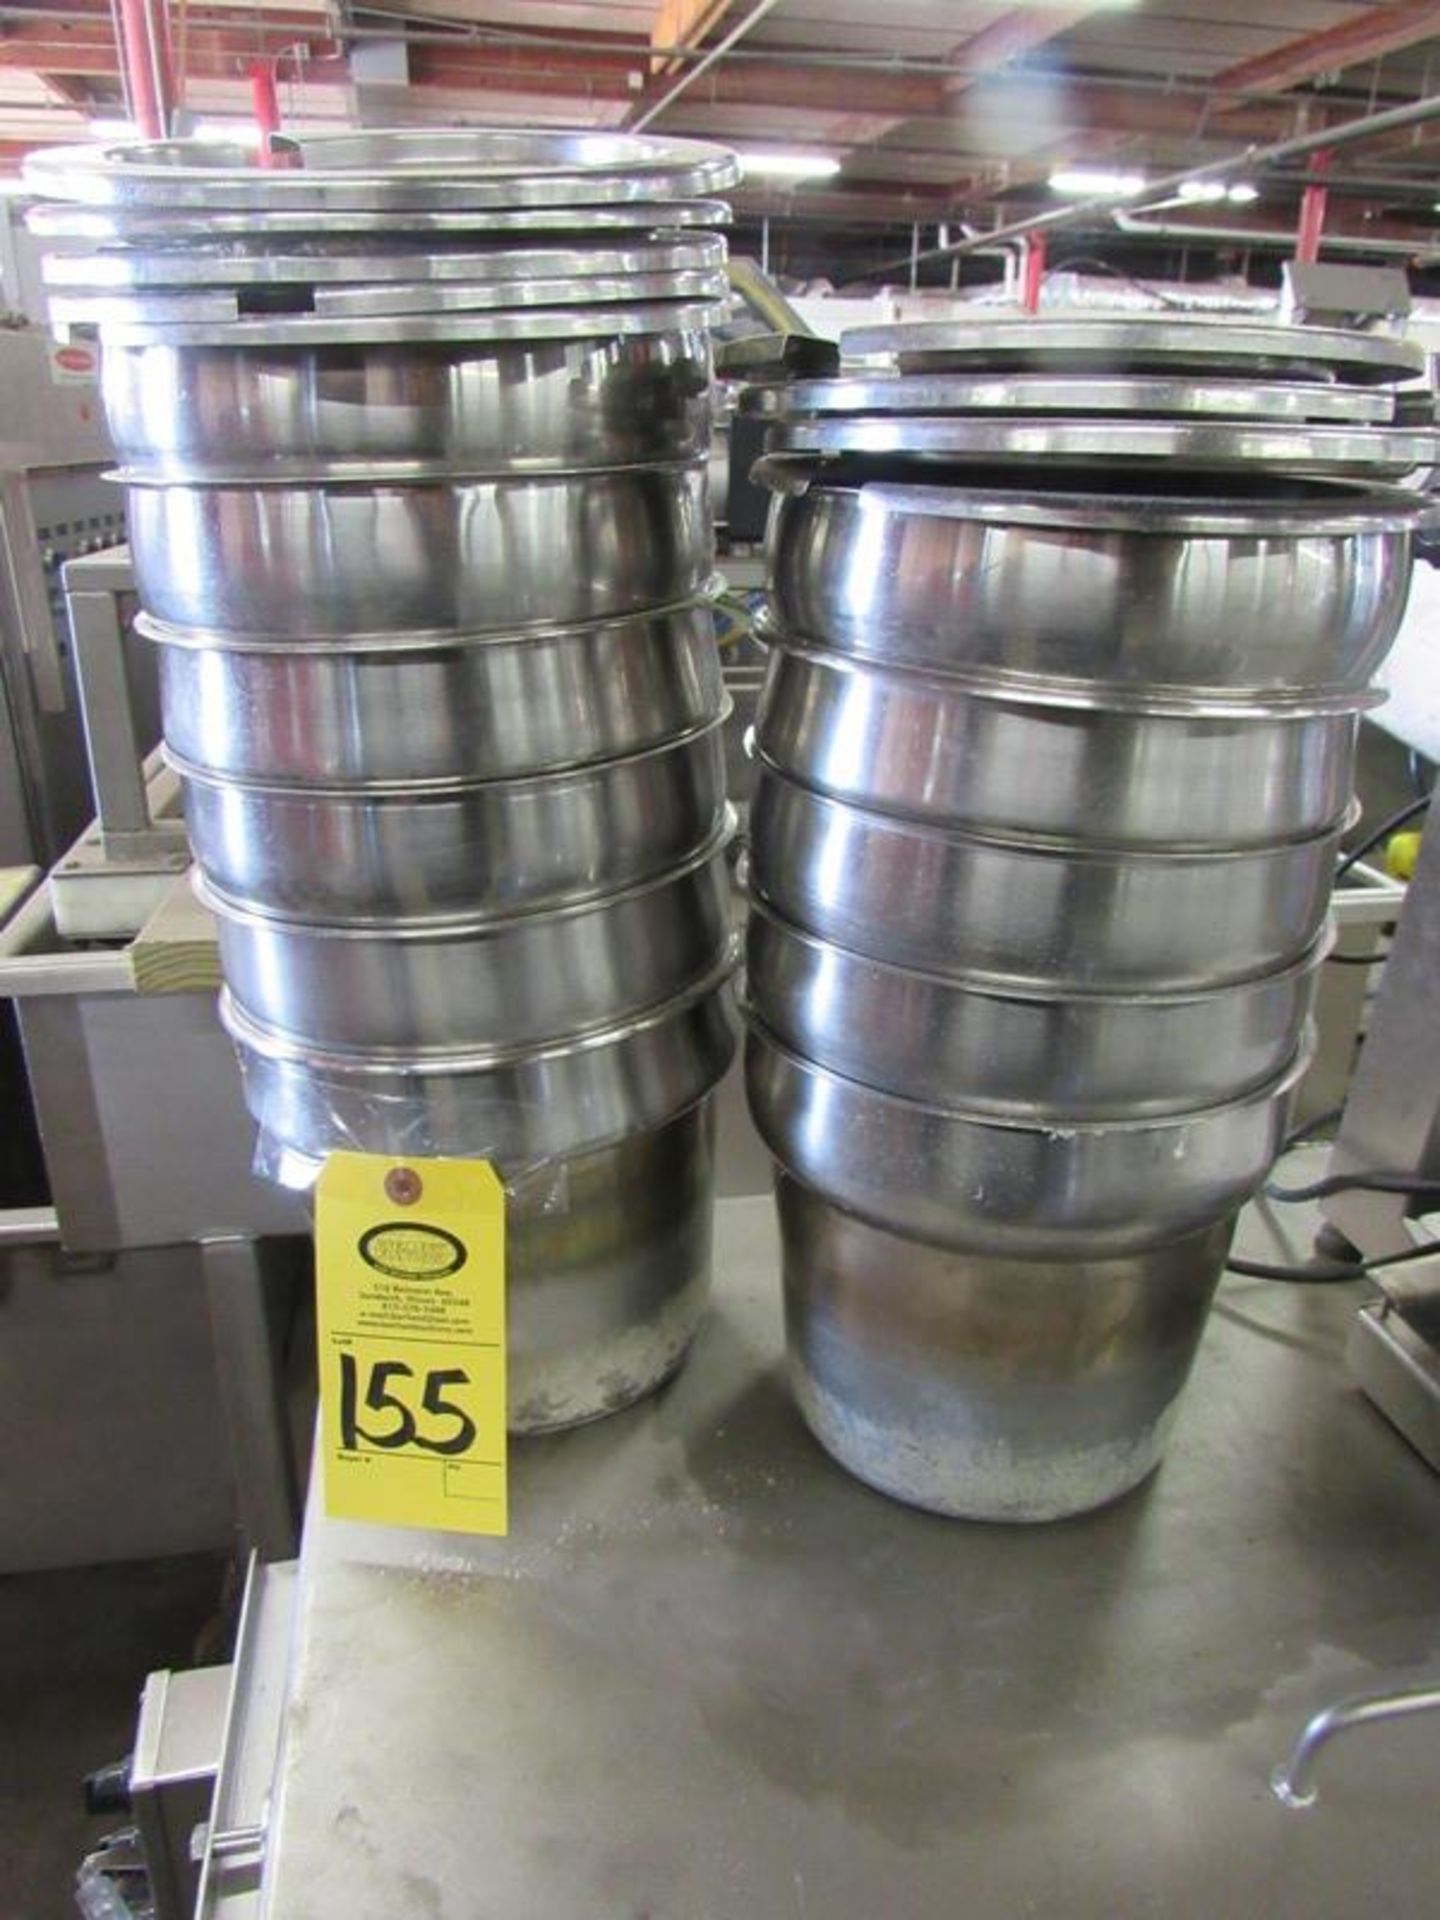 Lot of (11) Stainless Steel Steam Table Pots with (9) lids, 9" dia. at top, 8" deep (Required Loadin